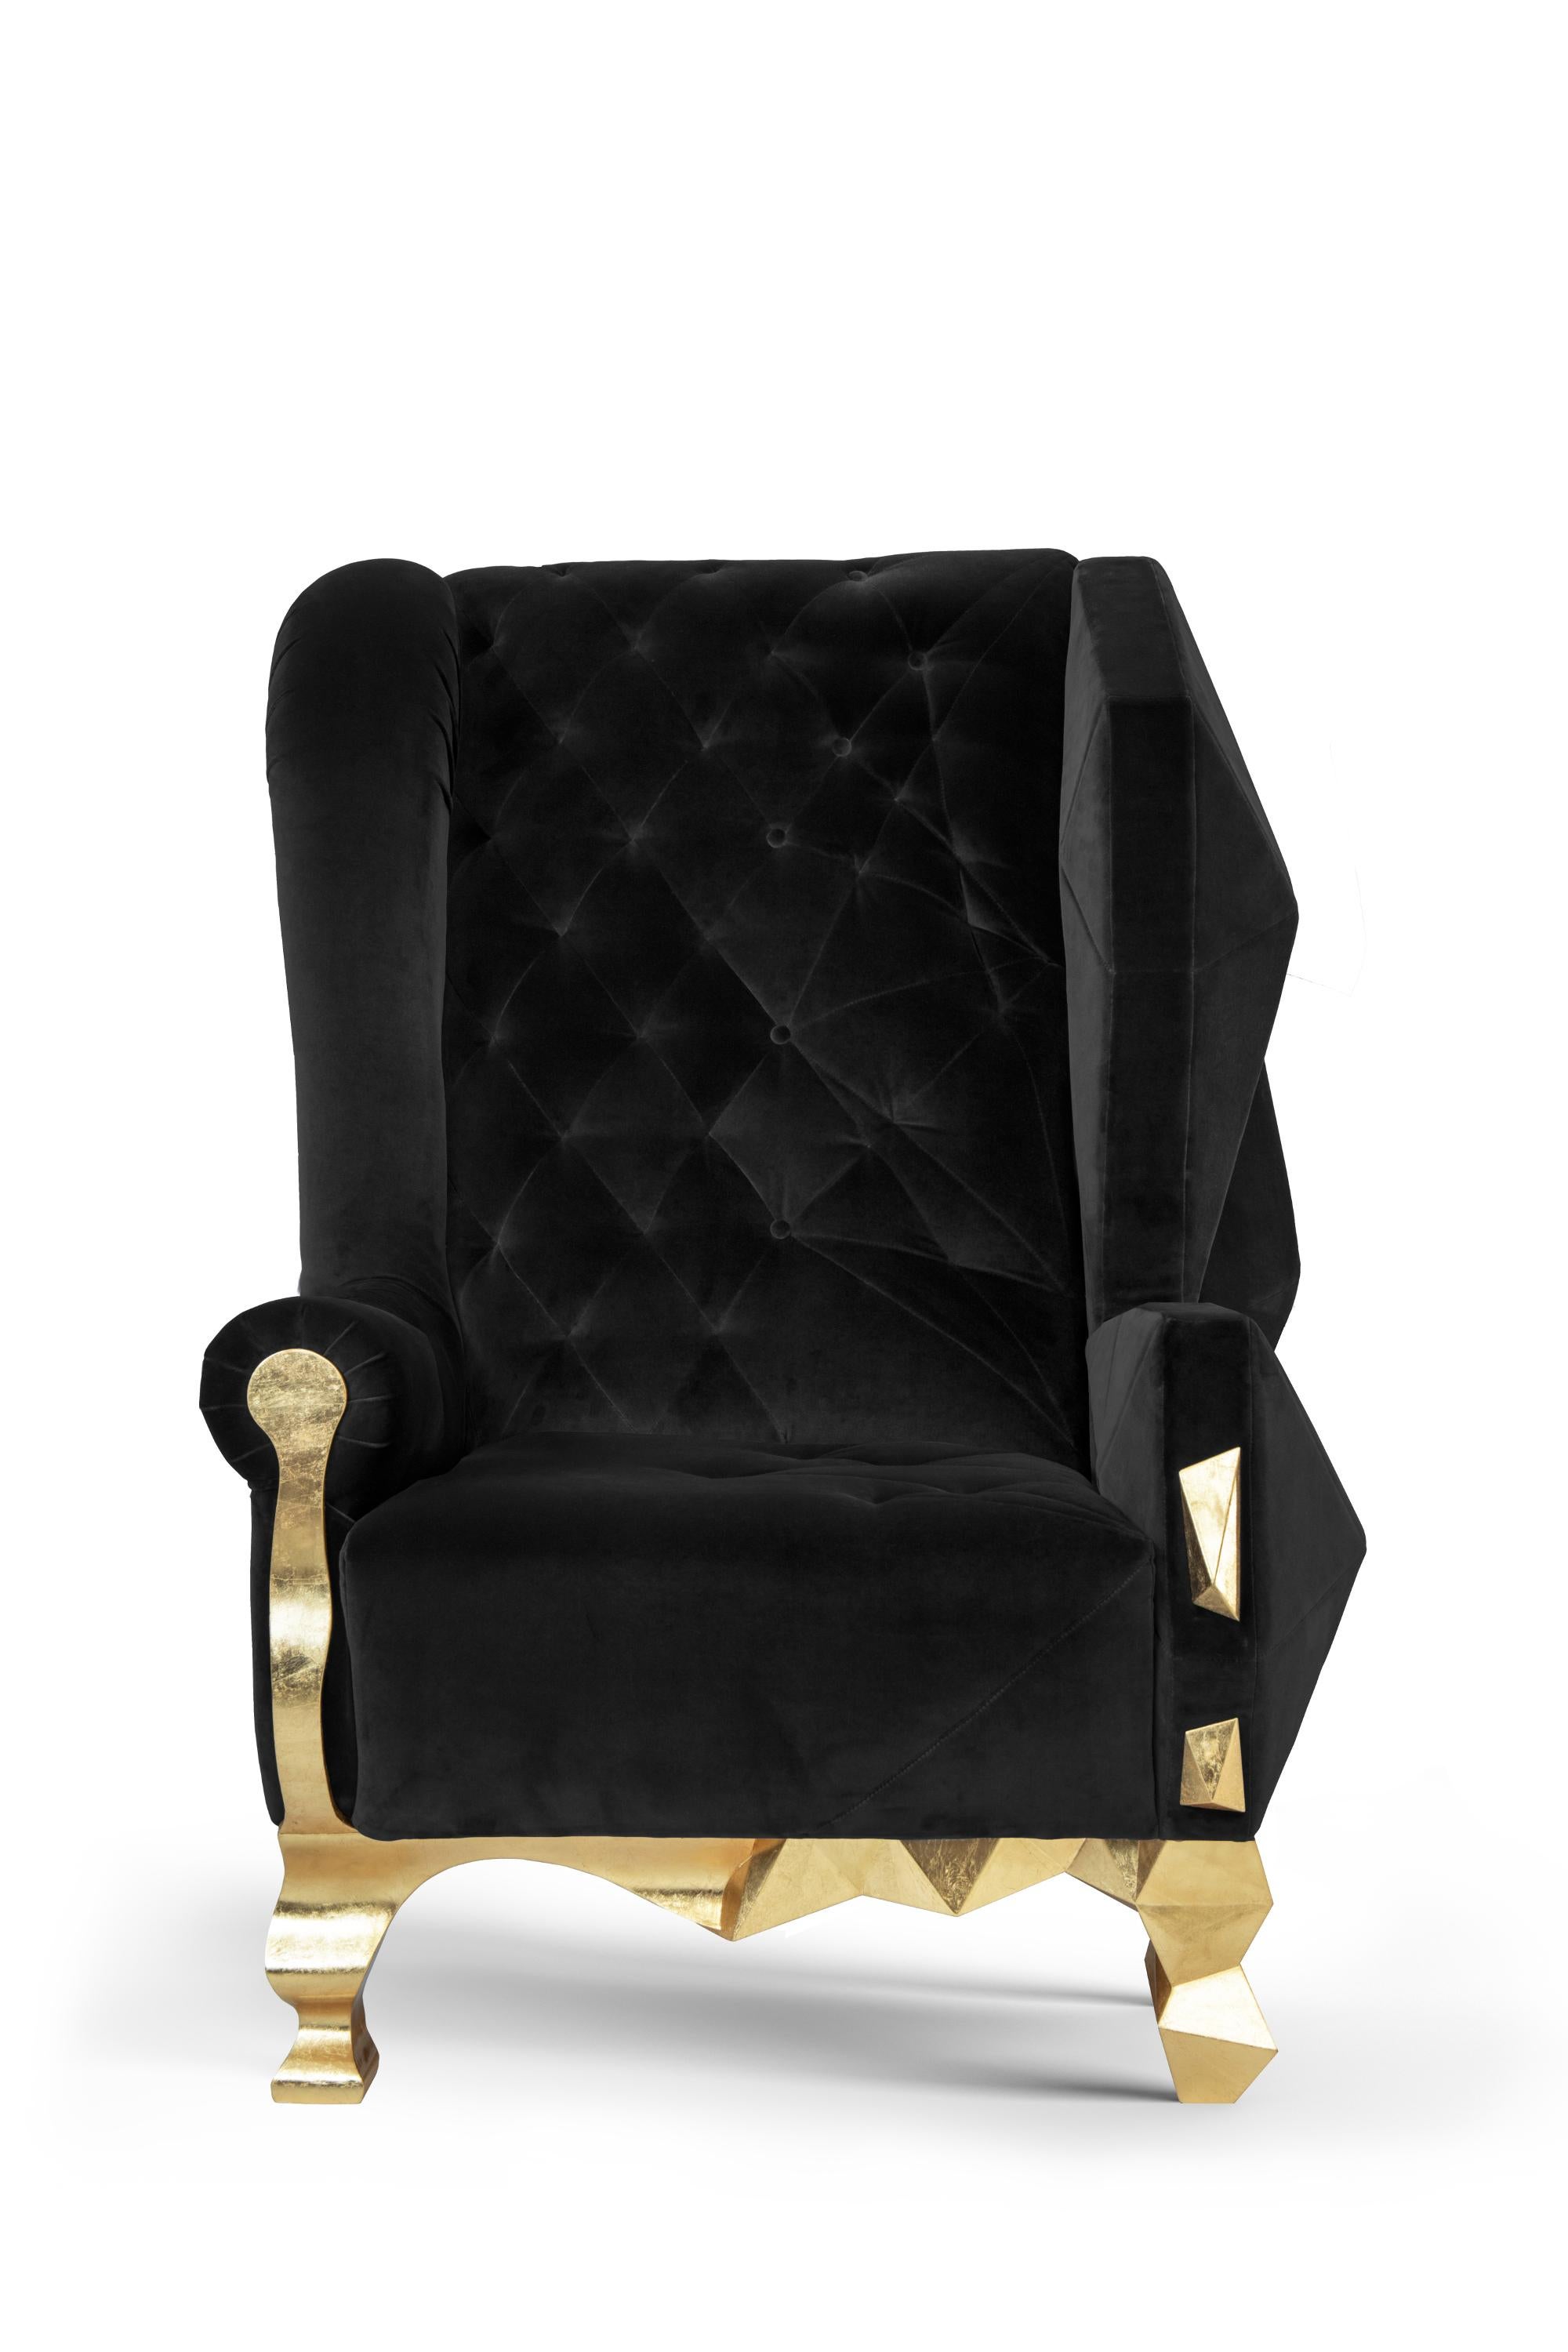 Black Rockchair by Royal Stranger
Dimensions: Width 98cm, height 135cm, depth 99cm
Different upholstery colors and finishes are available. Brass, copper or stainless steel in polished or brushed finish.
Materials: velvet on the top of the gold